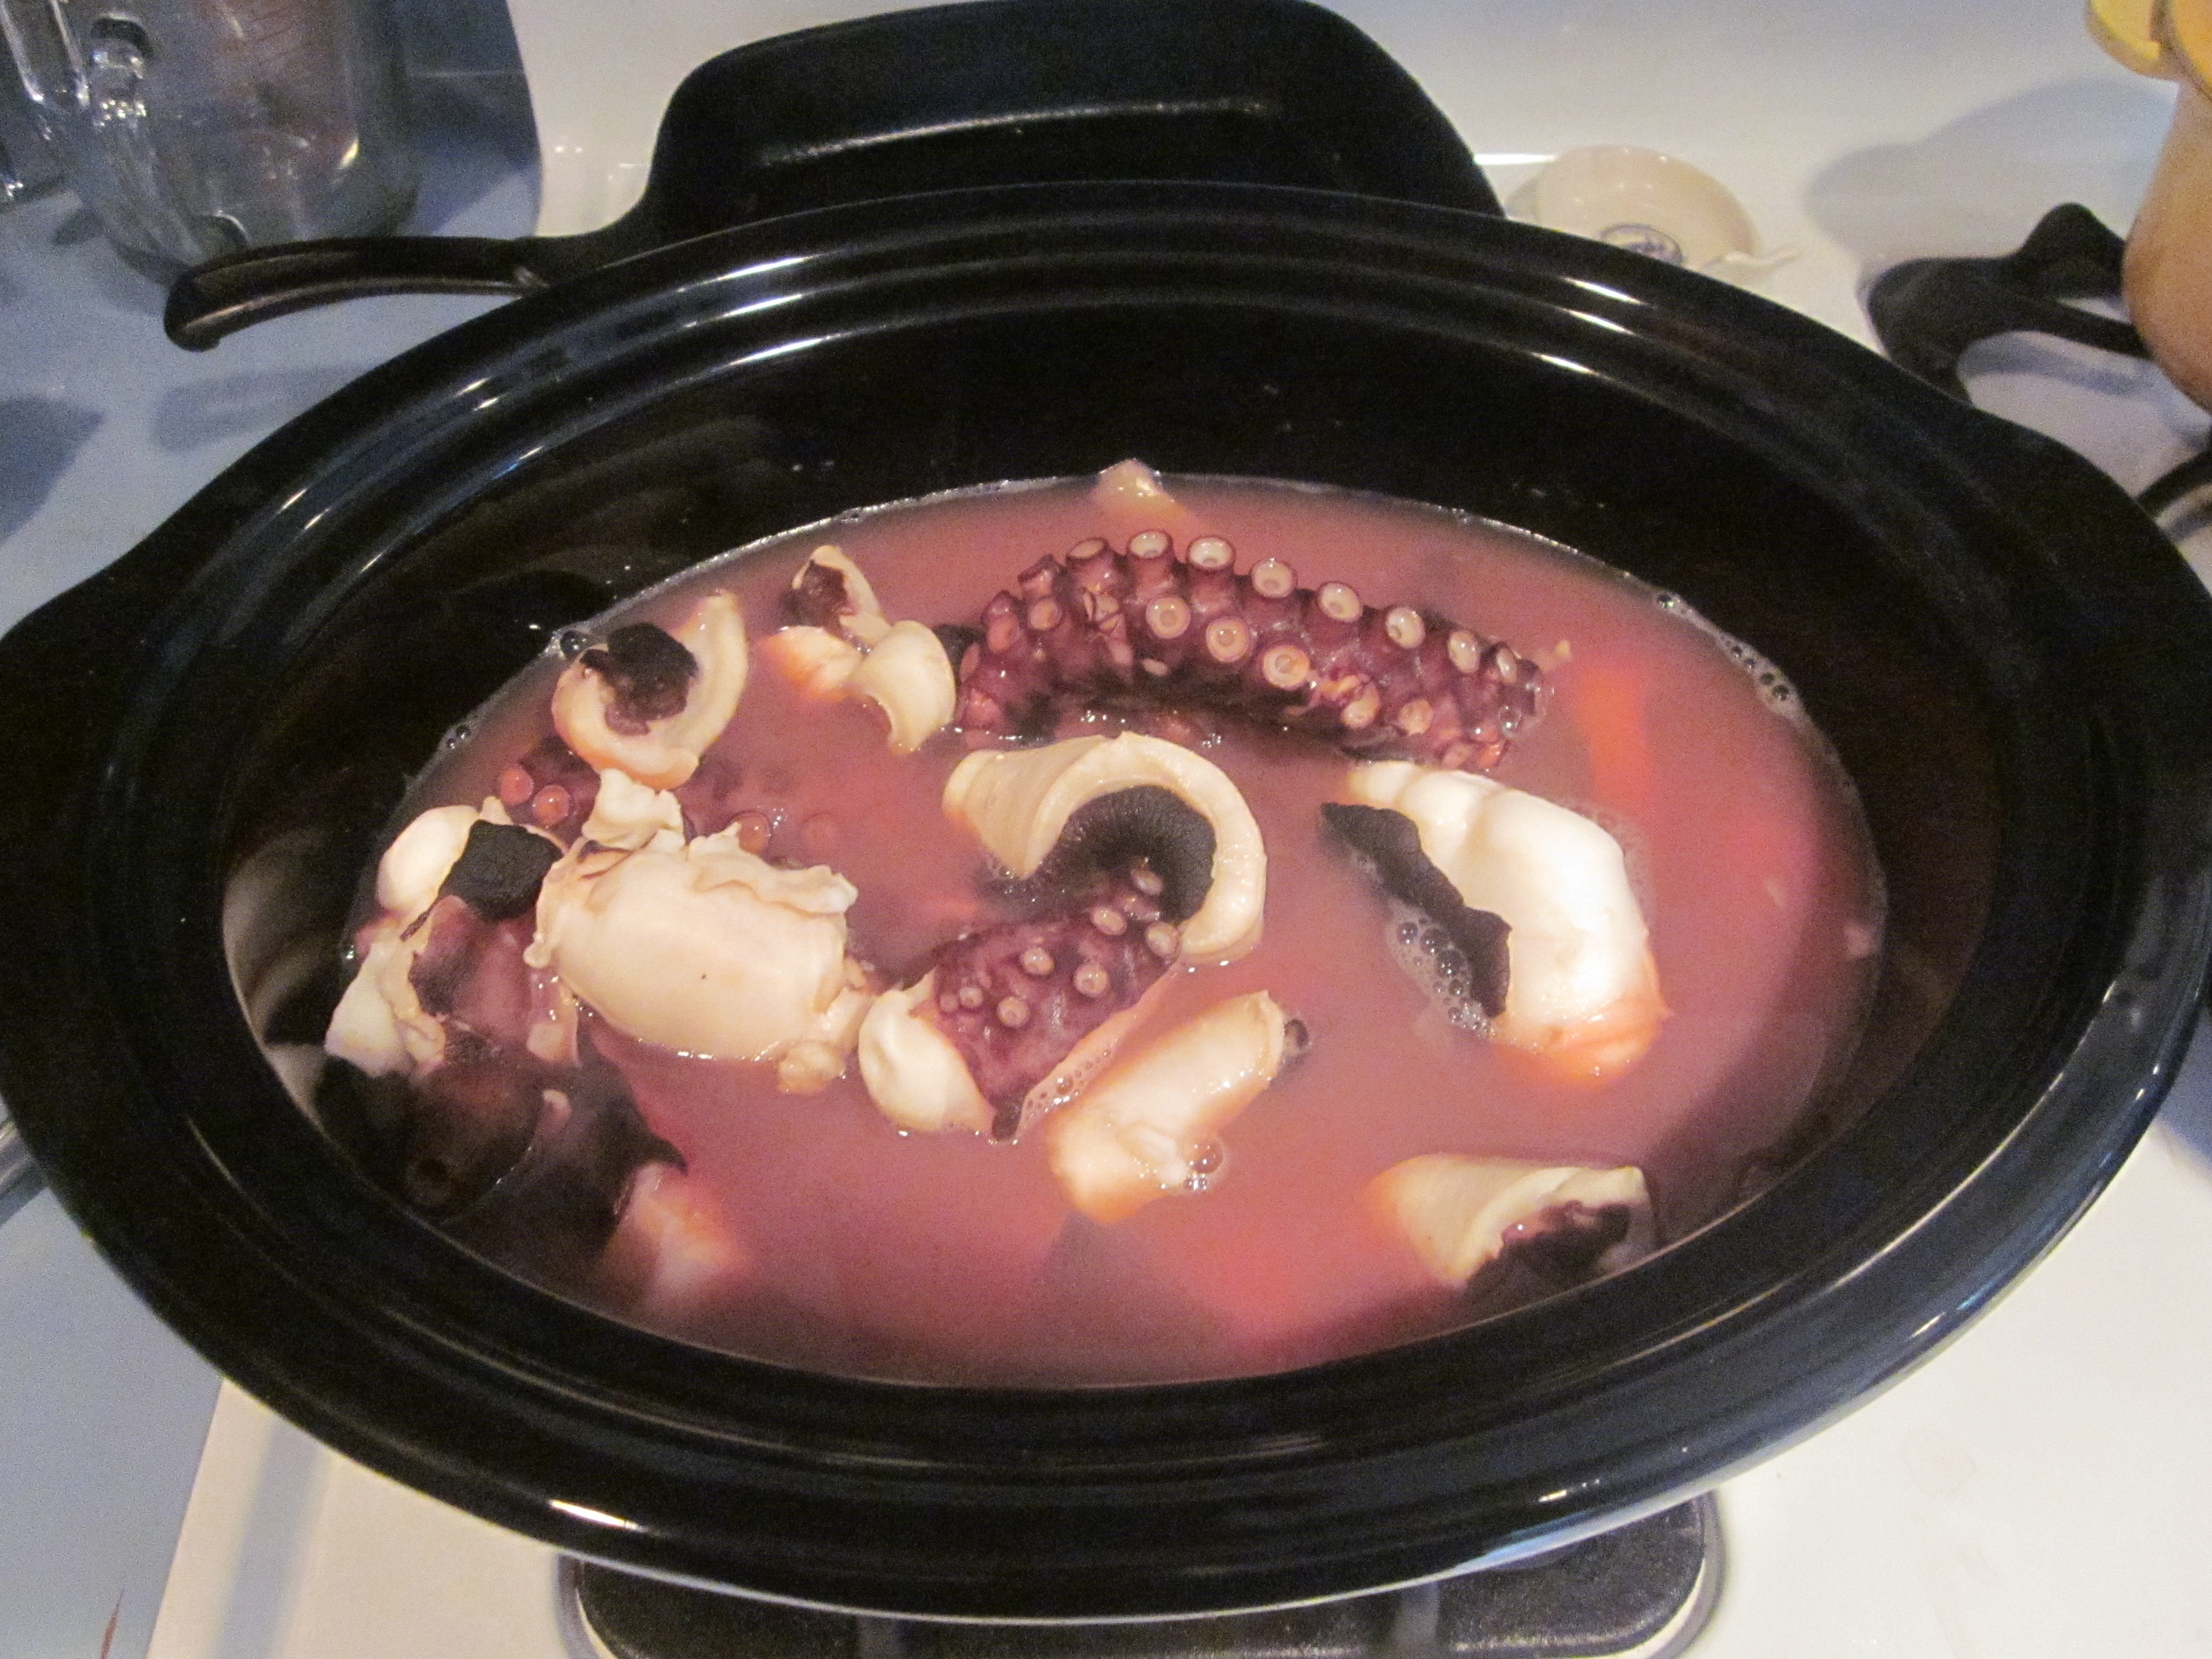 Octopus ready for slow cooking